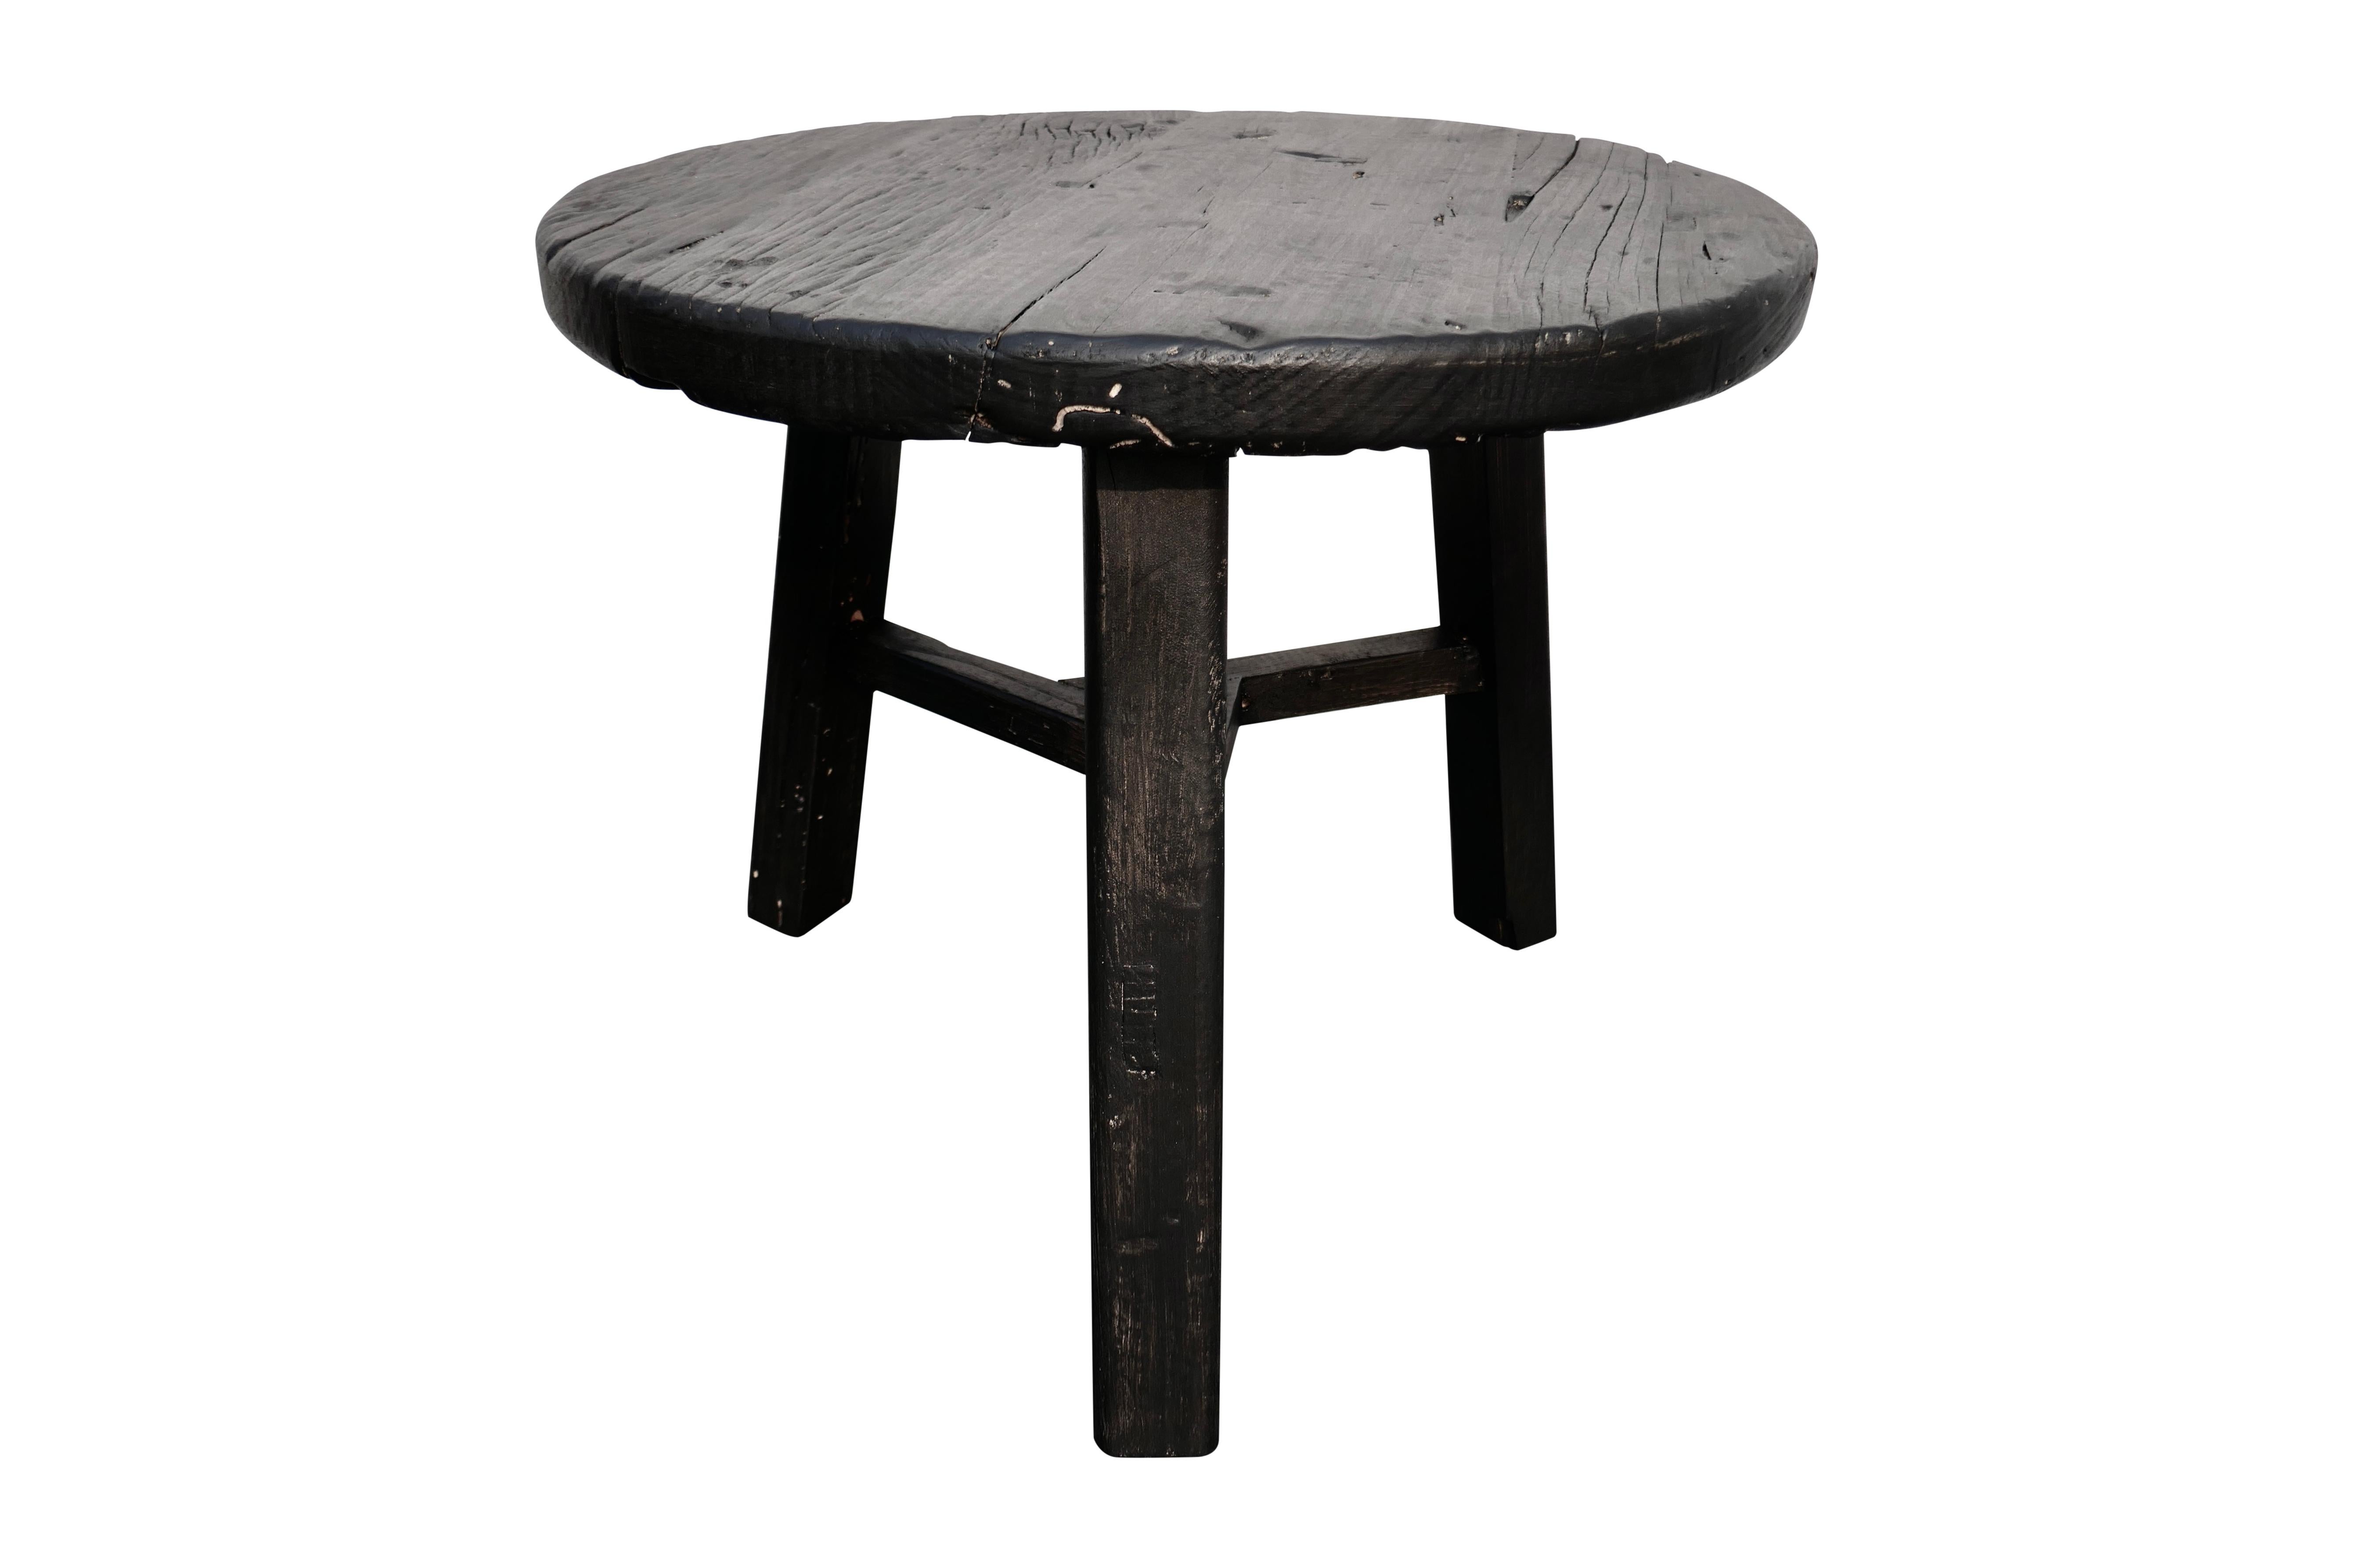 Versatile Asian side table/bench. Freshly hand-built of vintage aged solid heavy elmwood, constructed with mortise & tenon joinery. Showing much desirable natural aged wood characteristics through the lightly distressed ebony finish.